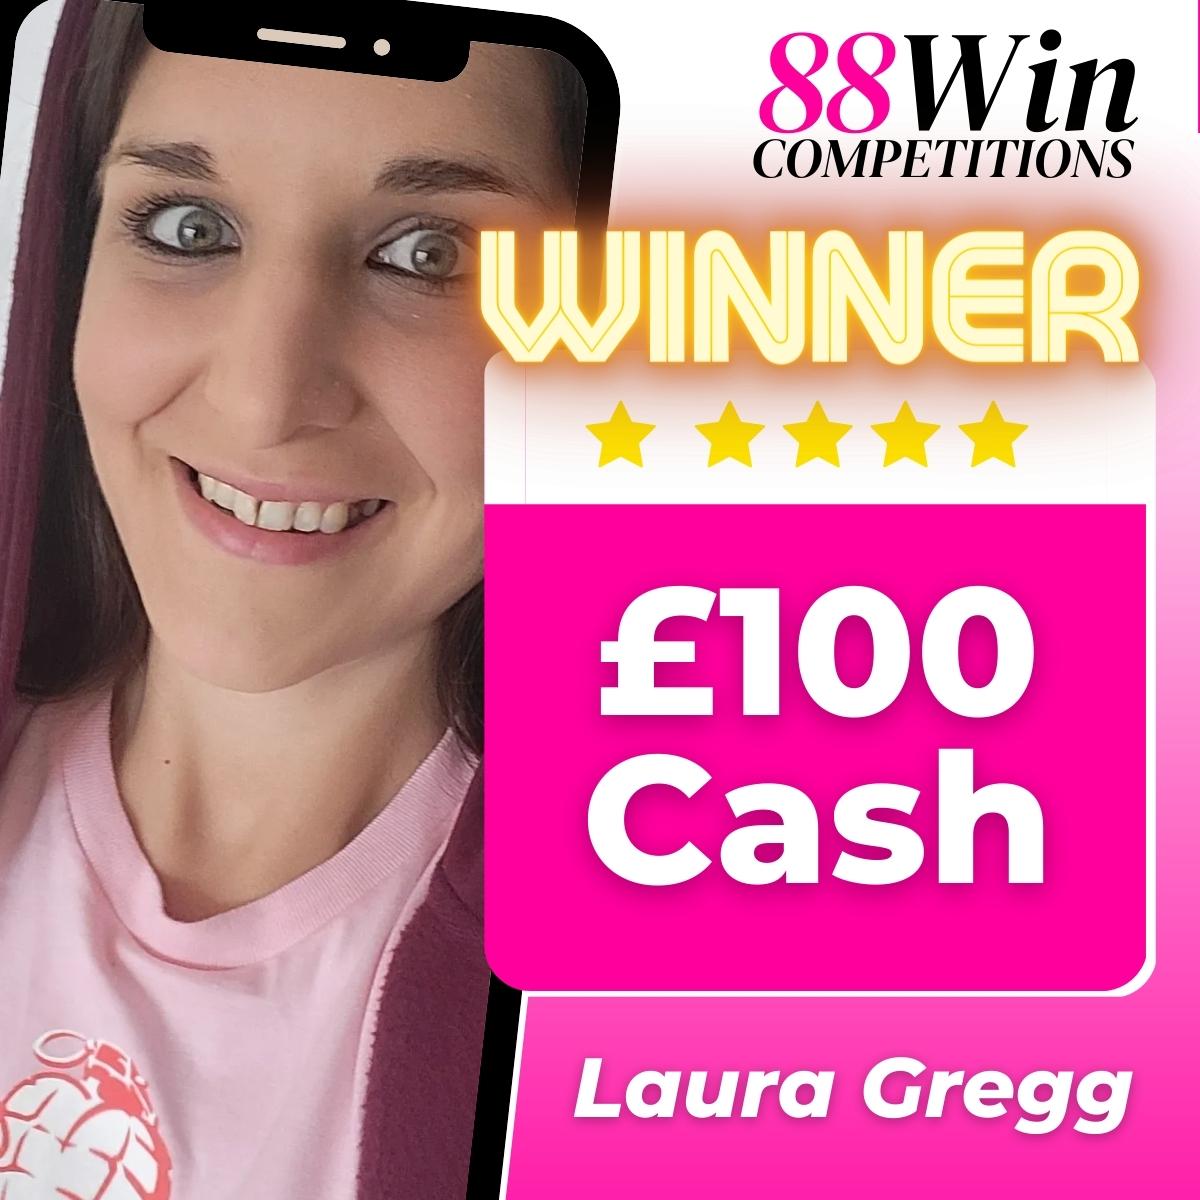 88Win Competitions Winner Photo £100 Cash